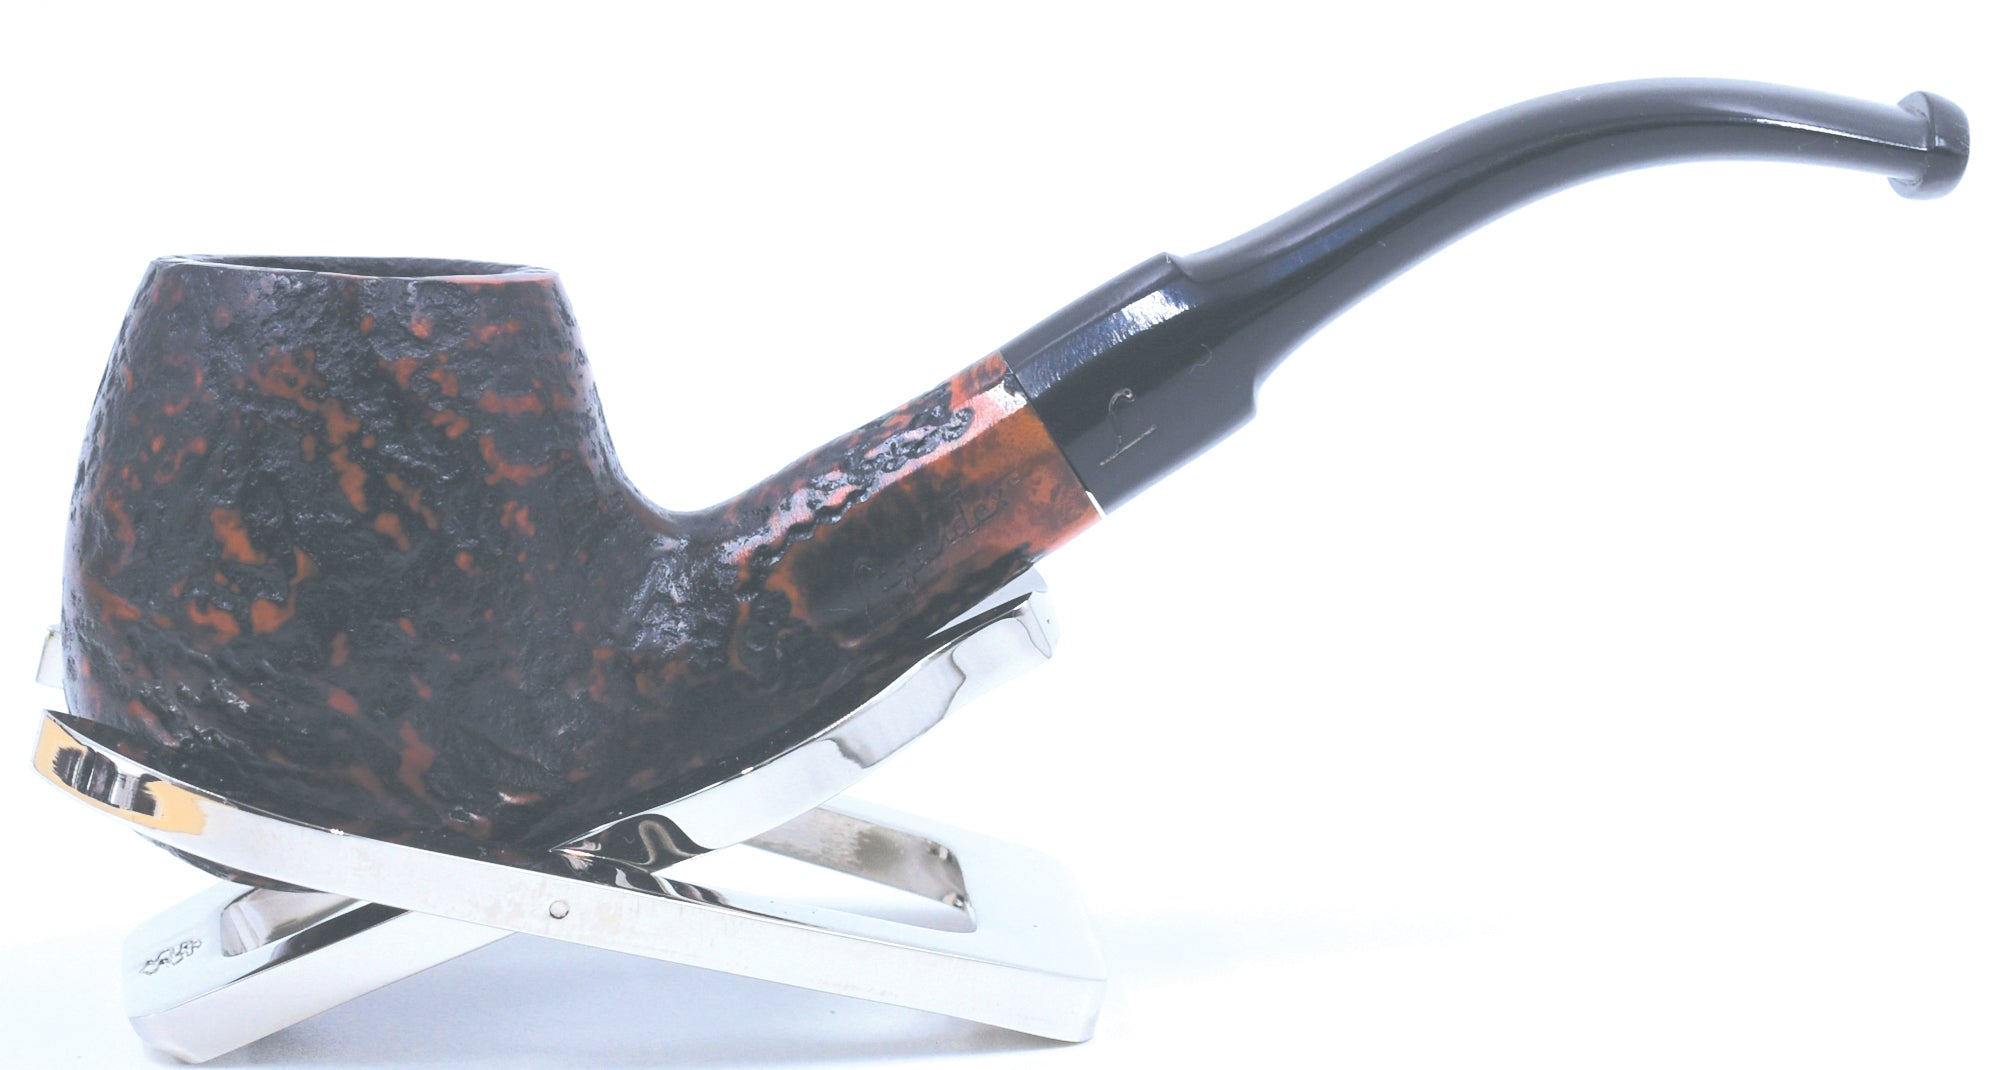 LEGENDEX® PUCCINI* 6 MM Filtered Briar Smoking Pipe Made In Italy 01-08-214